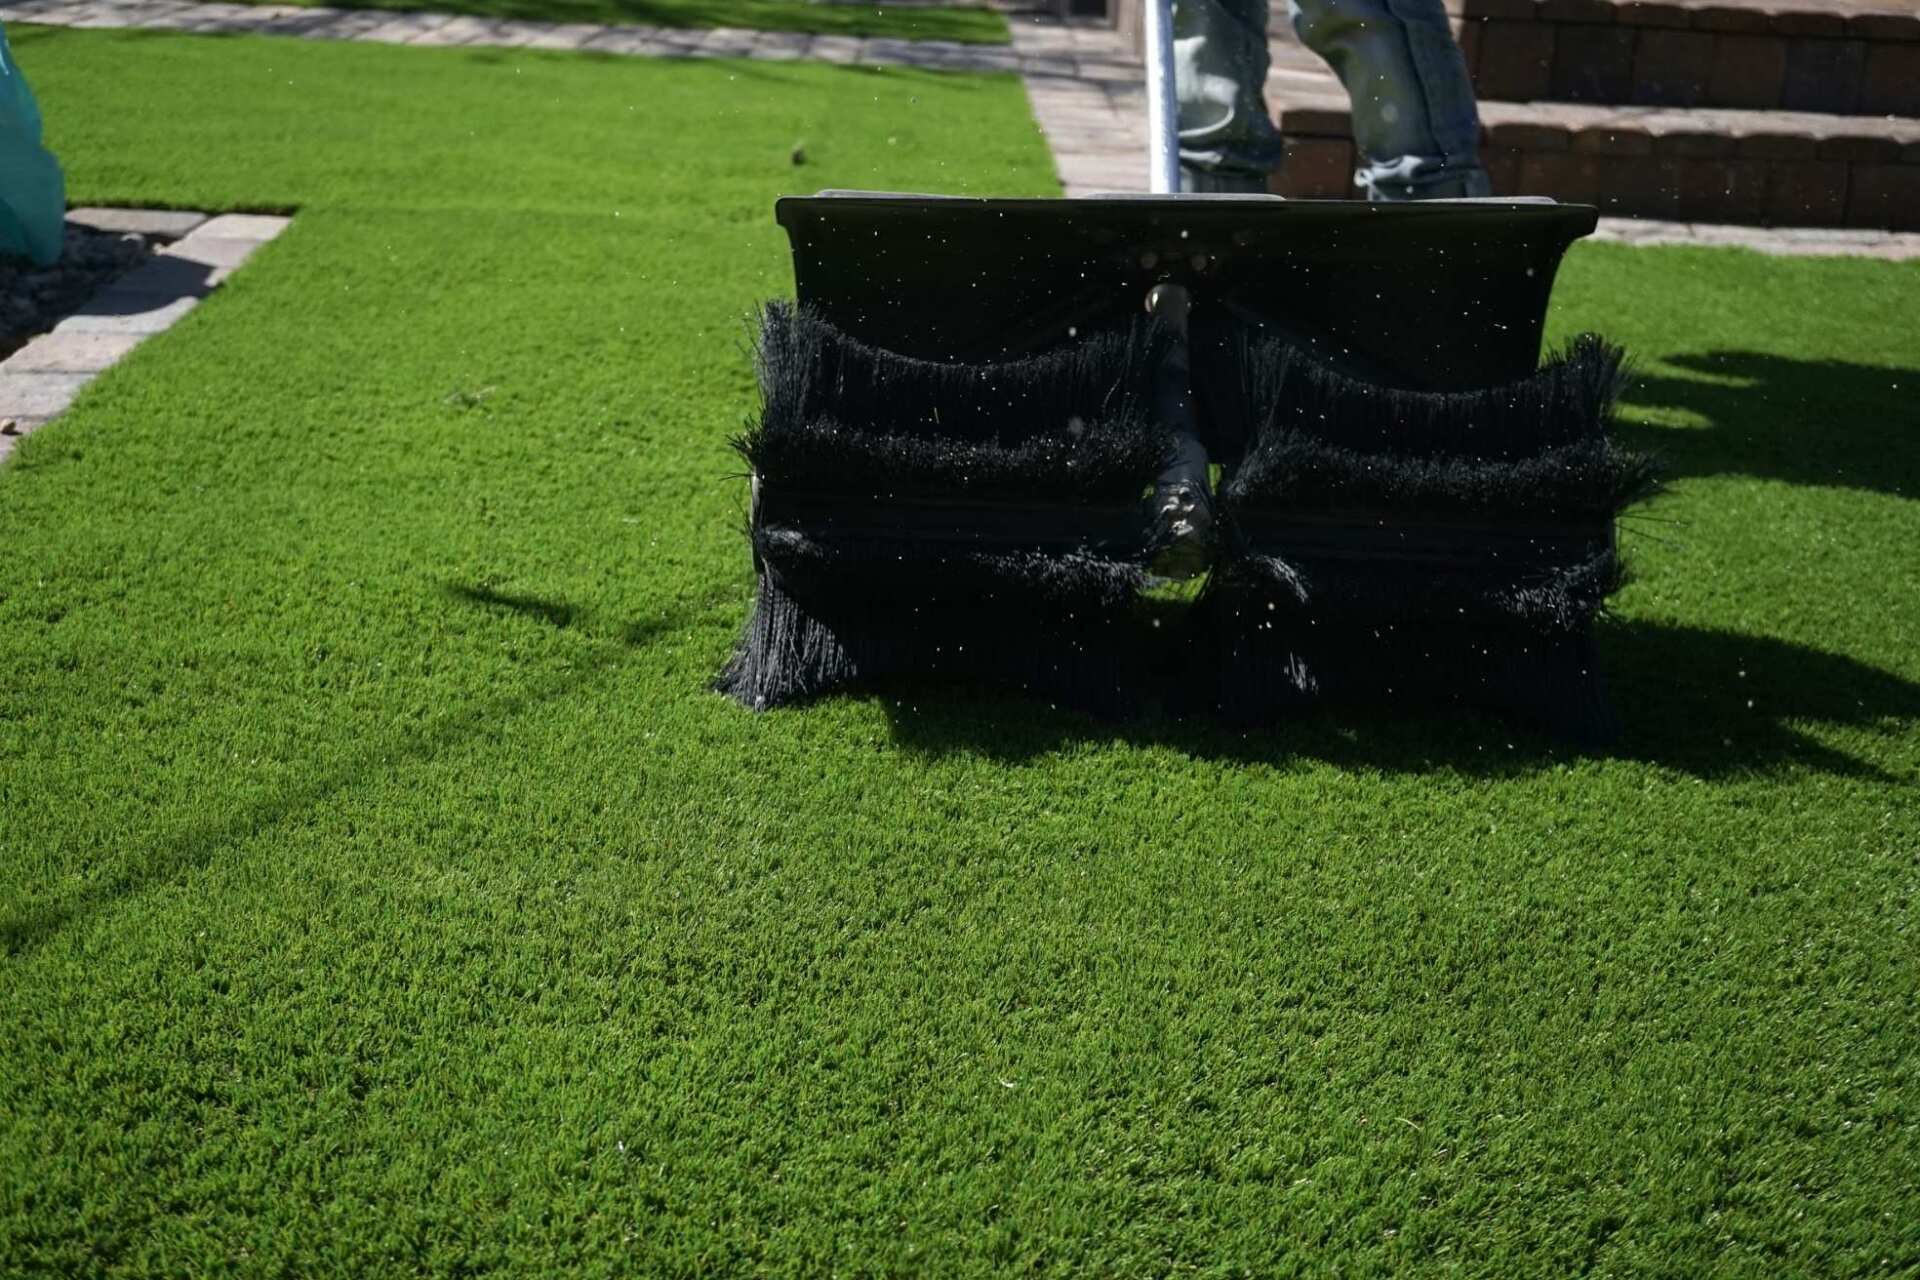 this power broom is used to remove debris from this newly installed artificial grass